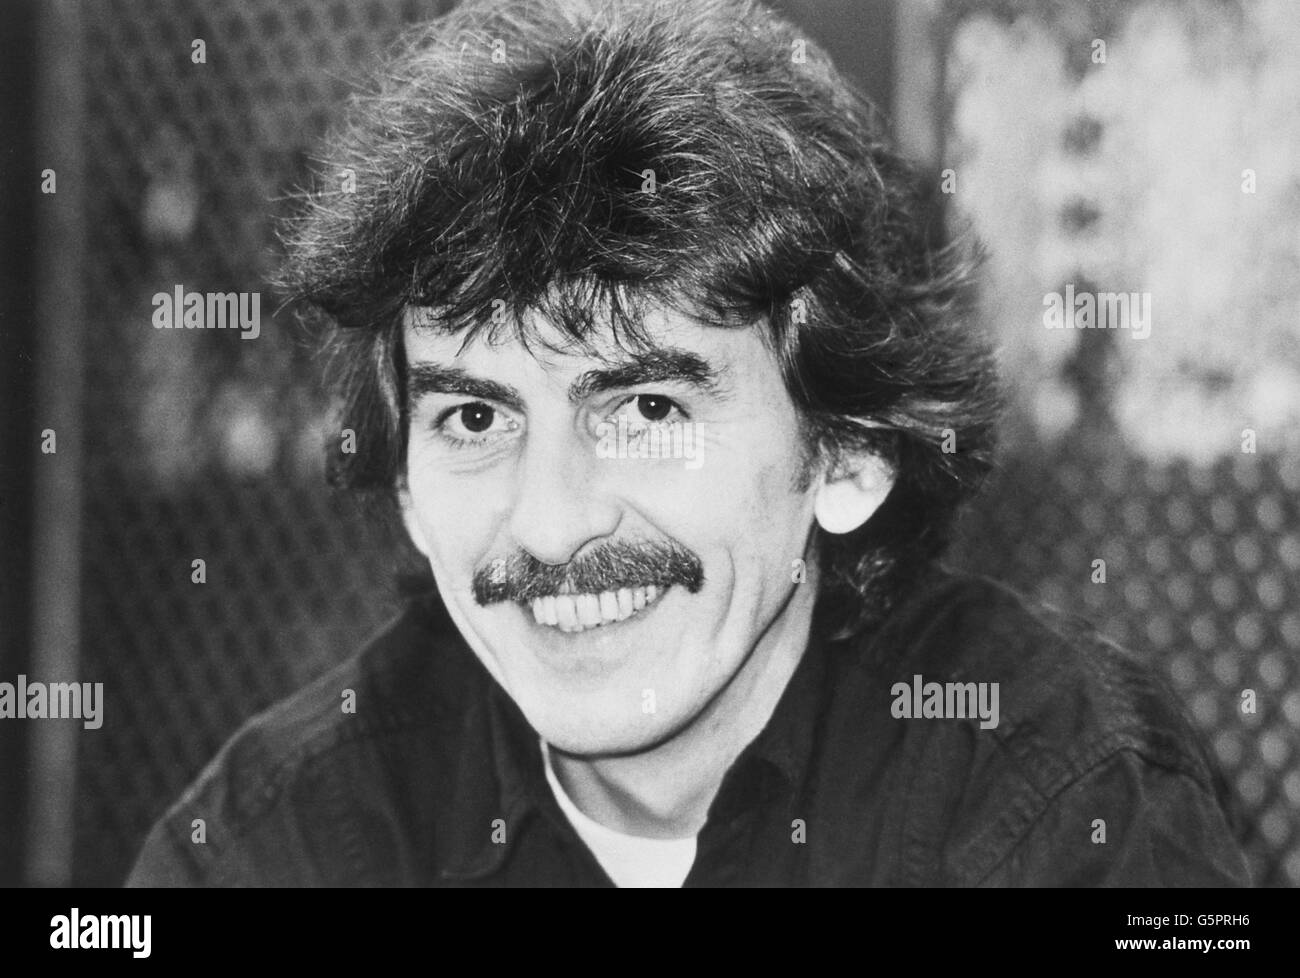 George Harrison, 41, the former Beatles star, now an executive producer of Handmade Films, which was founded in 1978. George is a co-producer of Handmade Films along with American financier Dennis O'Brien. Formerly married to model Patti Boyd, from whom he split in 1974, George now lives in a mansion near Henley, Oxford, with his Mexican-born wife Olivia, 35, and five-year-old son Dhani, while travelling to and from Handmade headquarters in Cadogan Square, London. Stock Photo